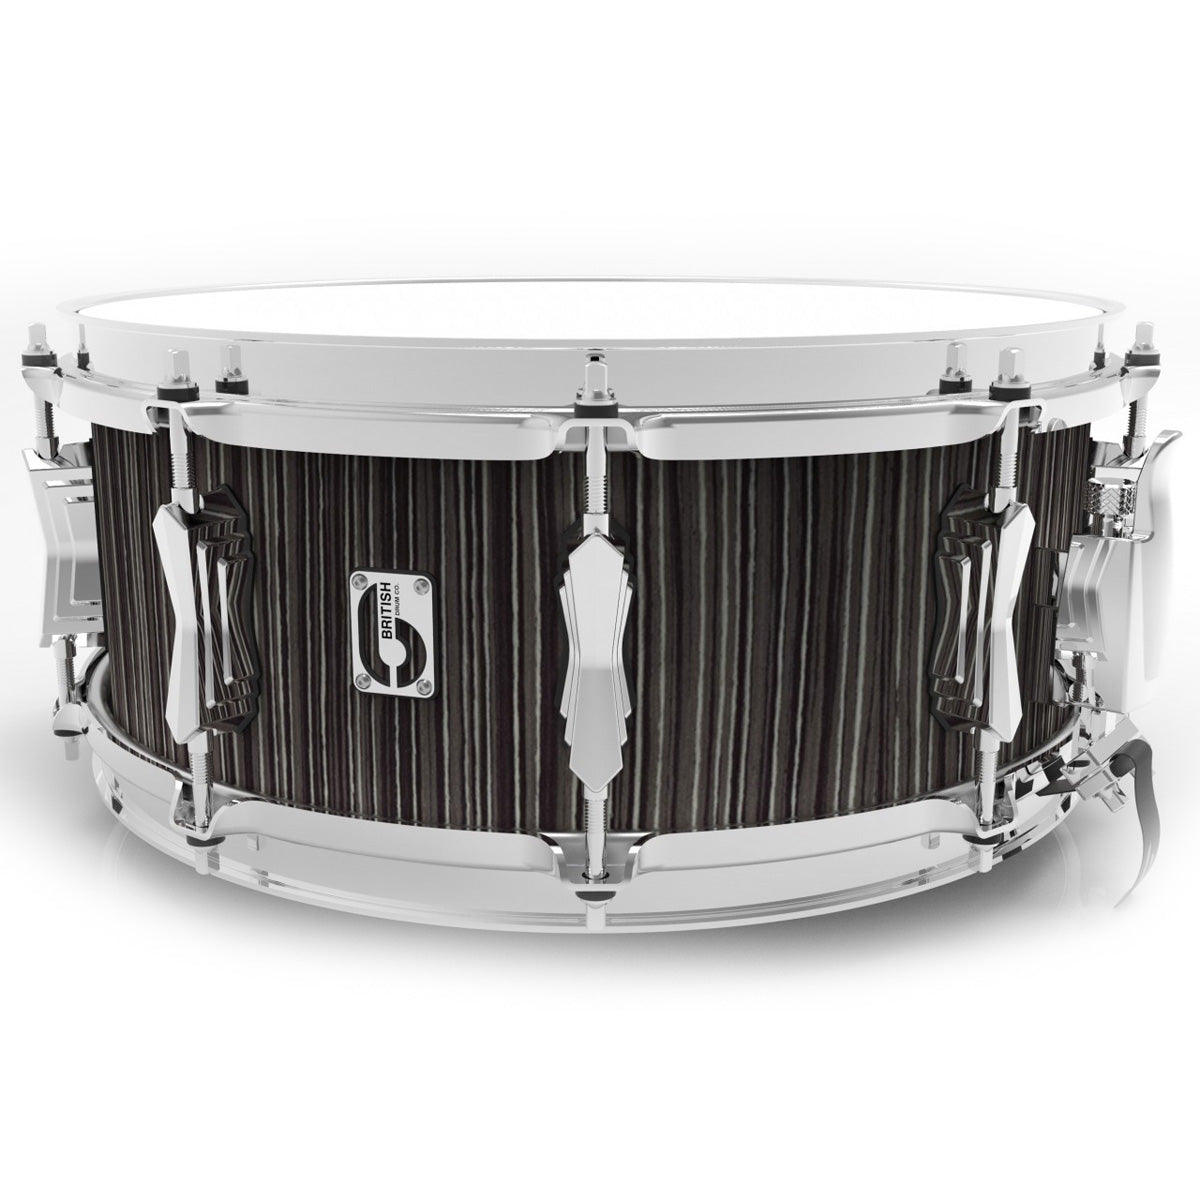 British Drum Company Legend Series 14"x6.5" Snare Drum in Carnaby Slate